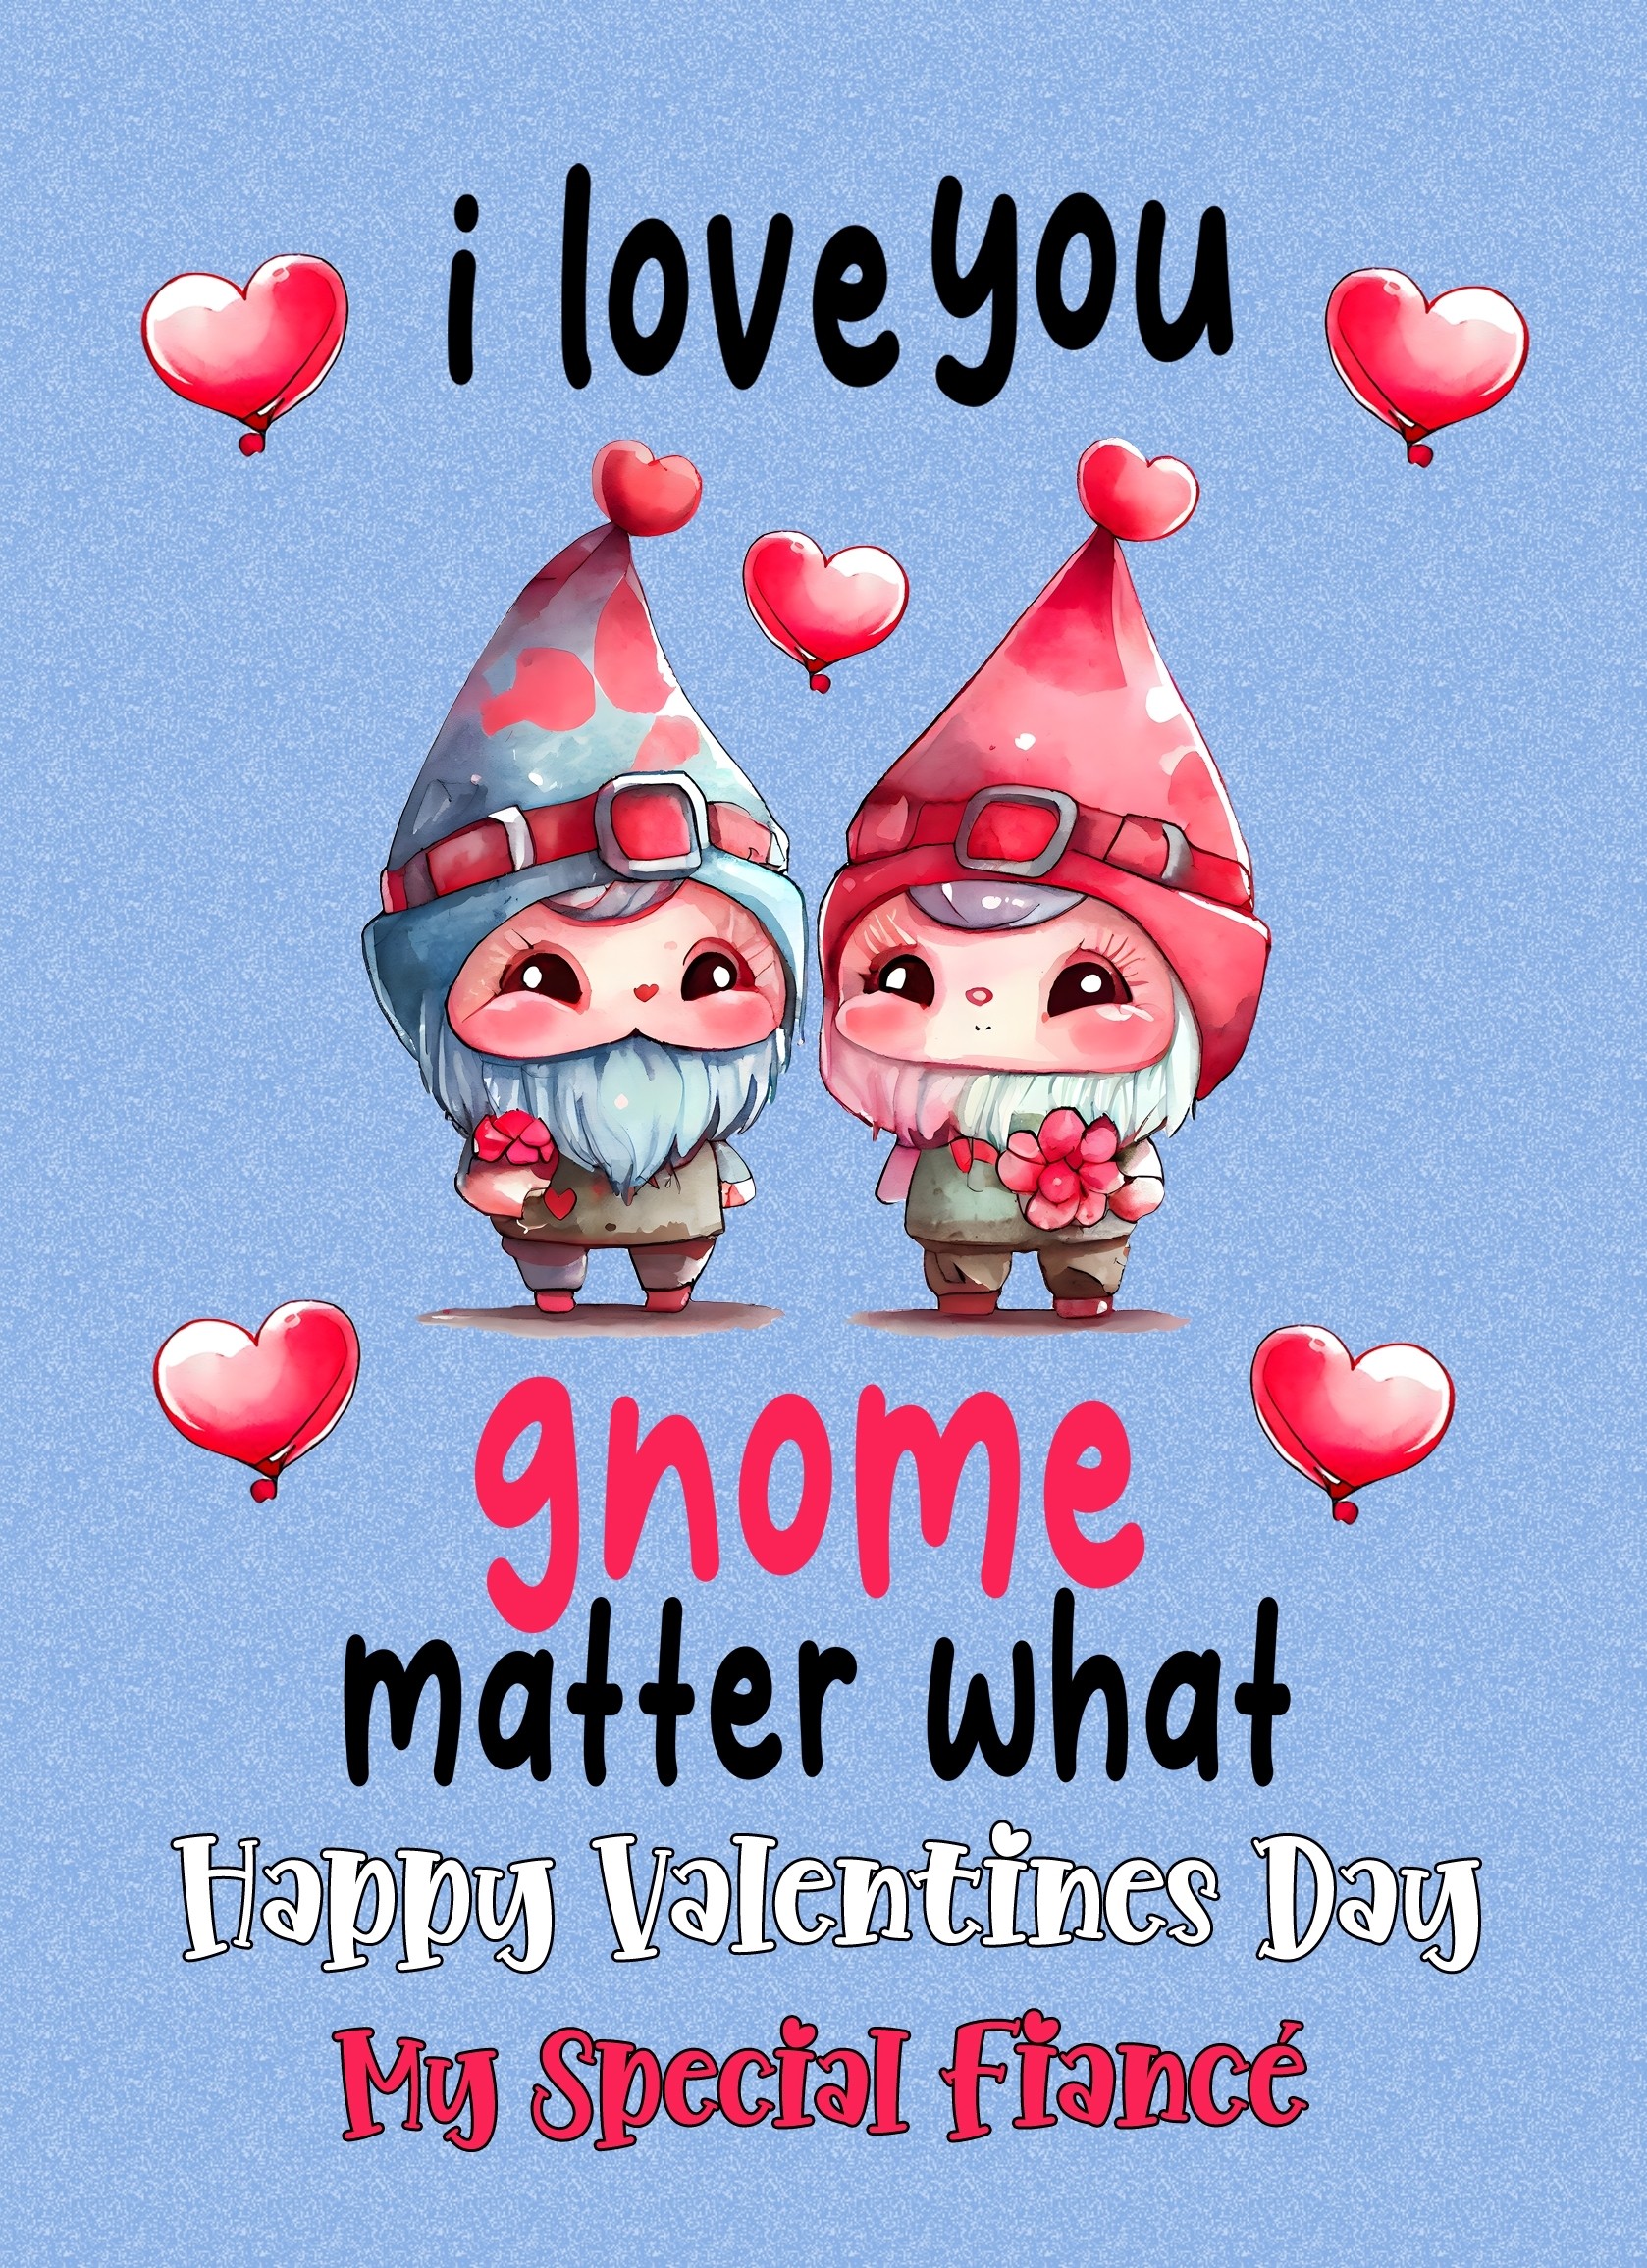 Funny Pun Valentines Day Card for Fiance (Gnome Matter)